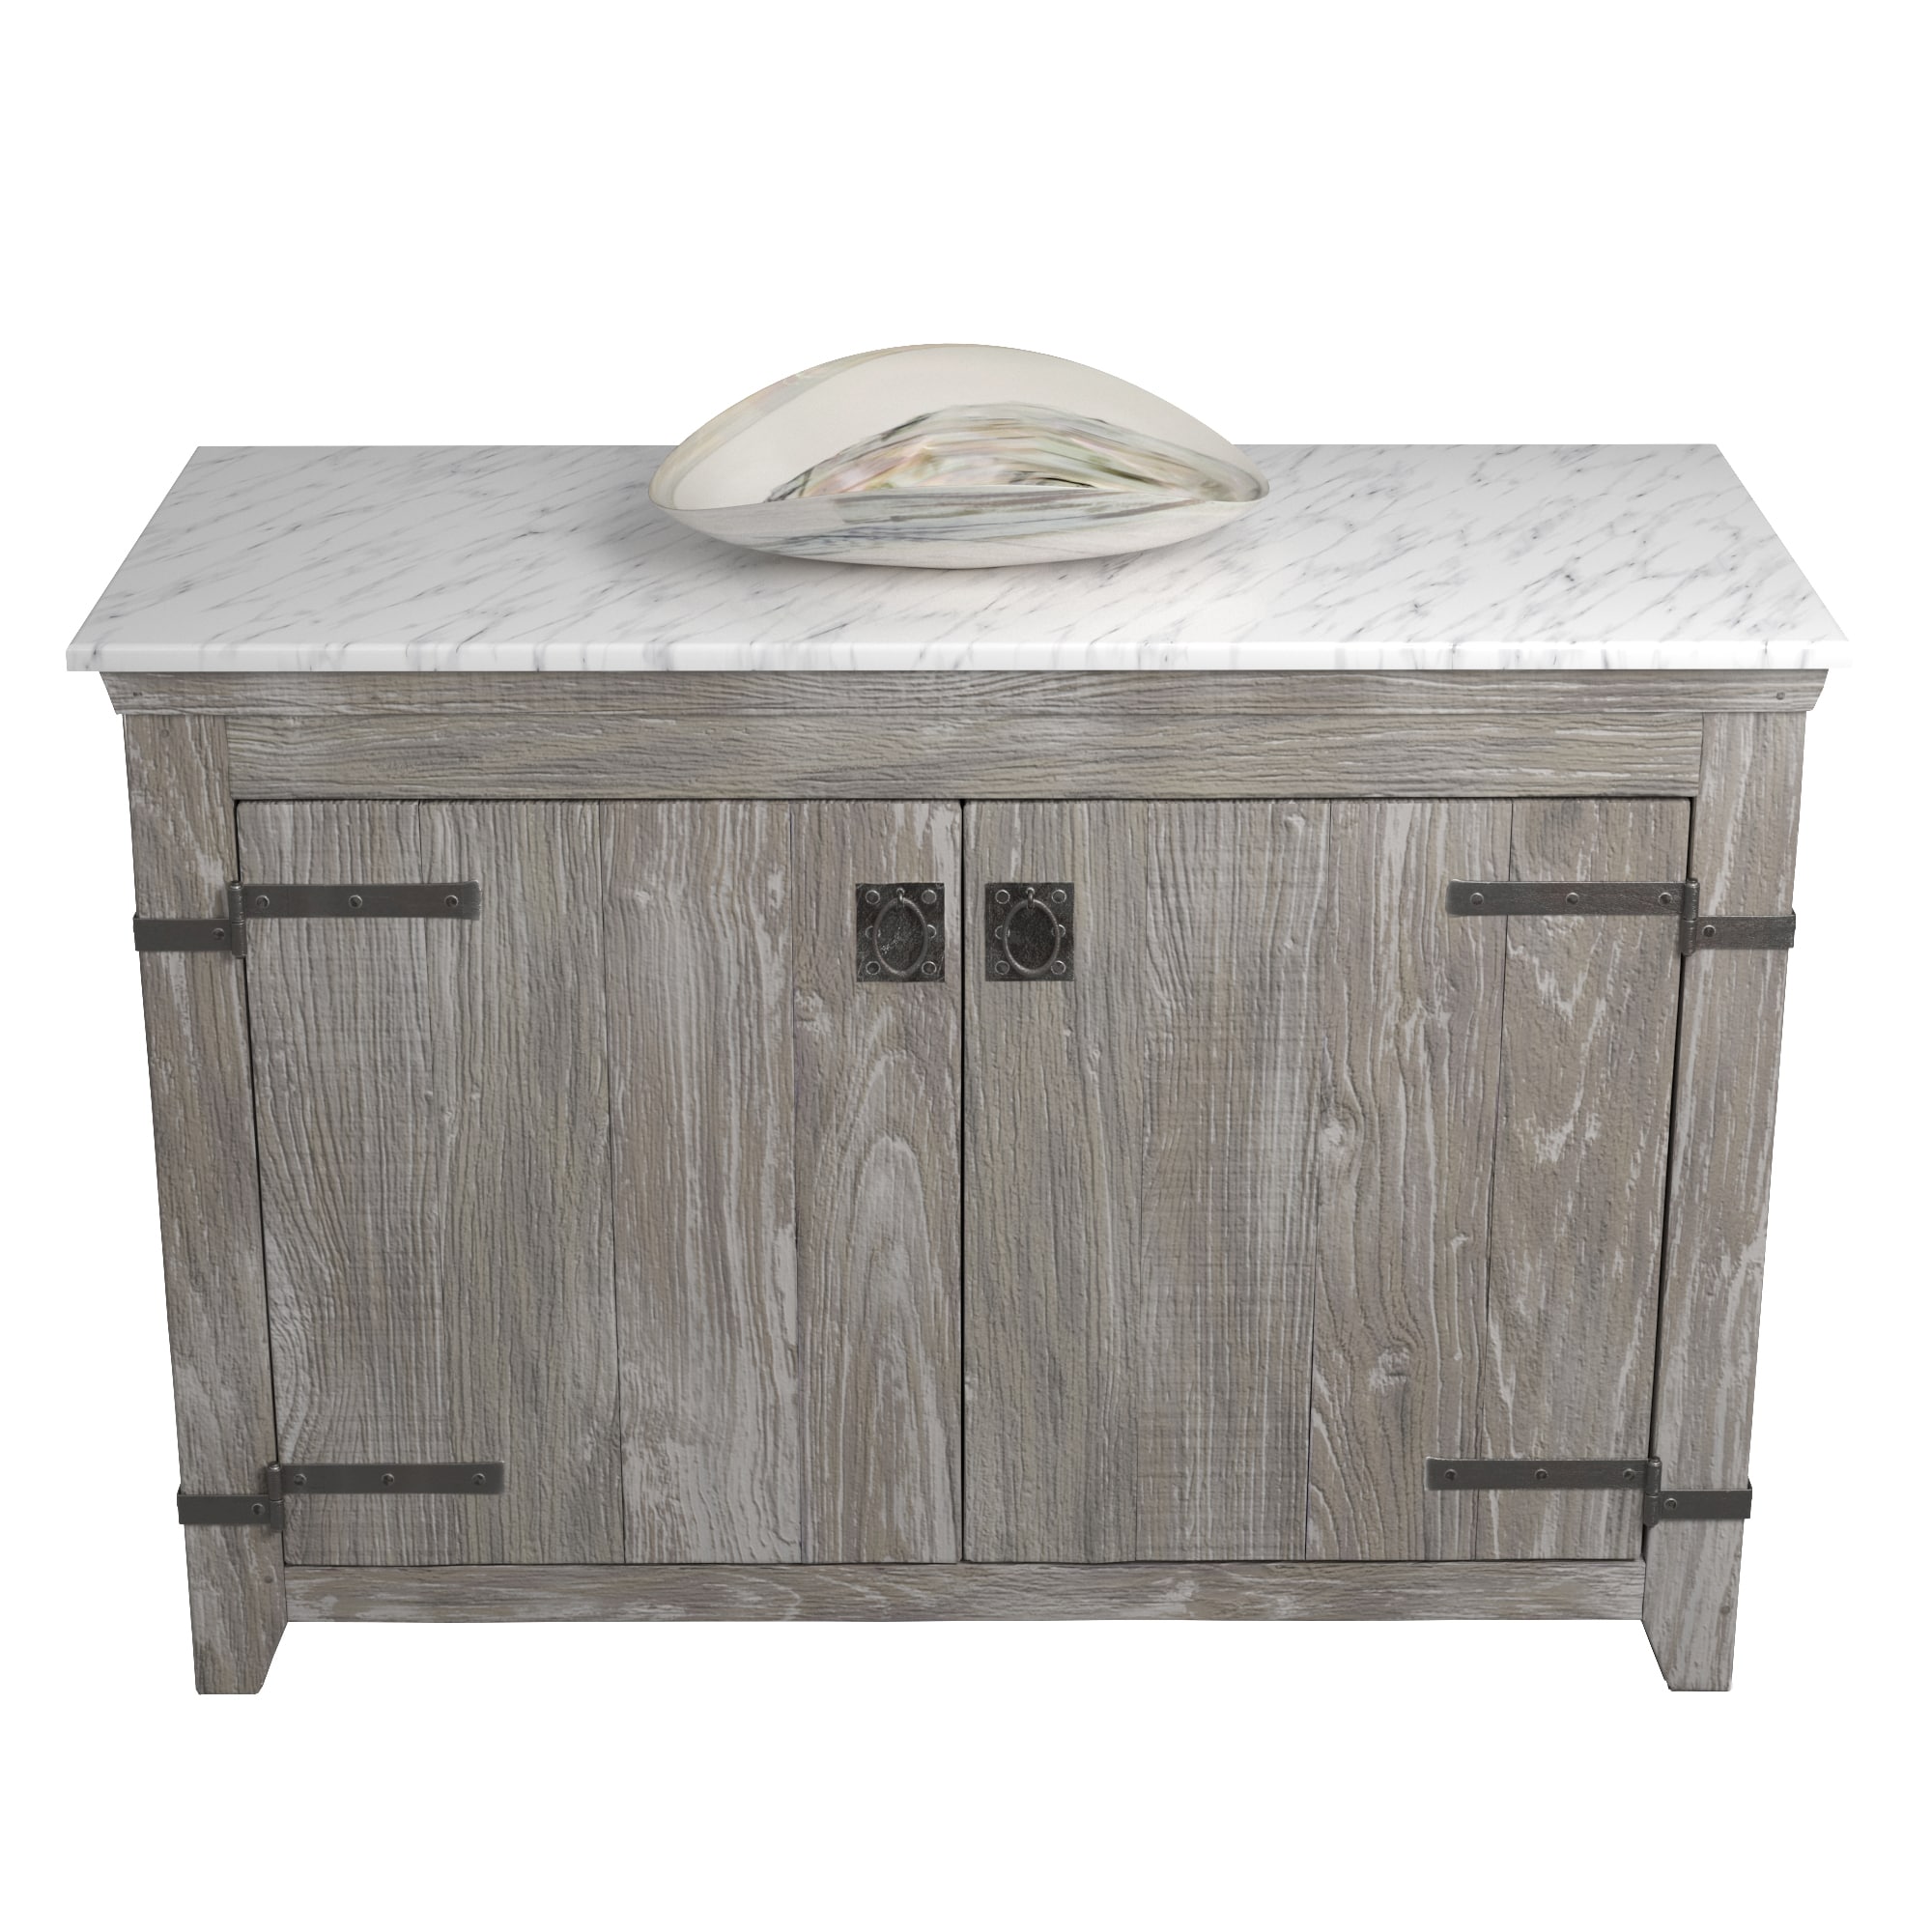 Native Trails 48" Americana Vanity in Driftwood with Carrara Marble Top and Sorrento in Abalone, Single Faucet Hole, BND48-VB-CT-MG-095